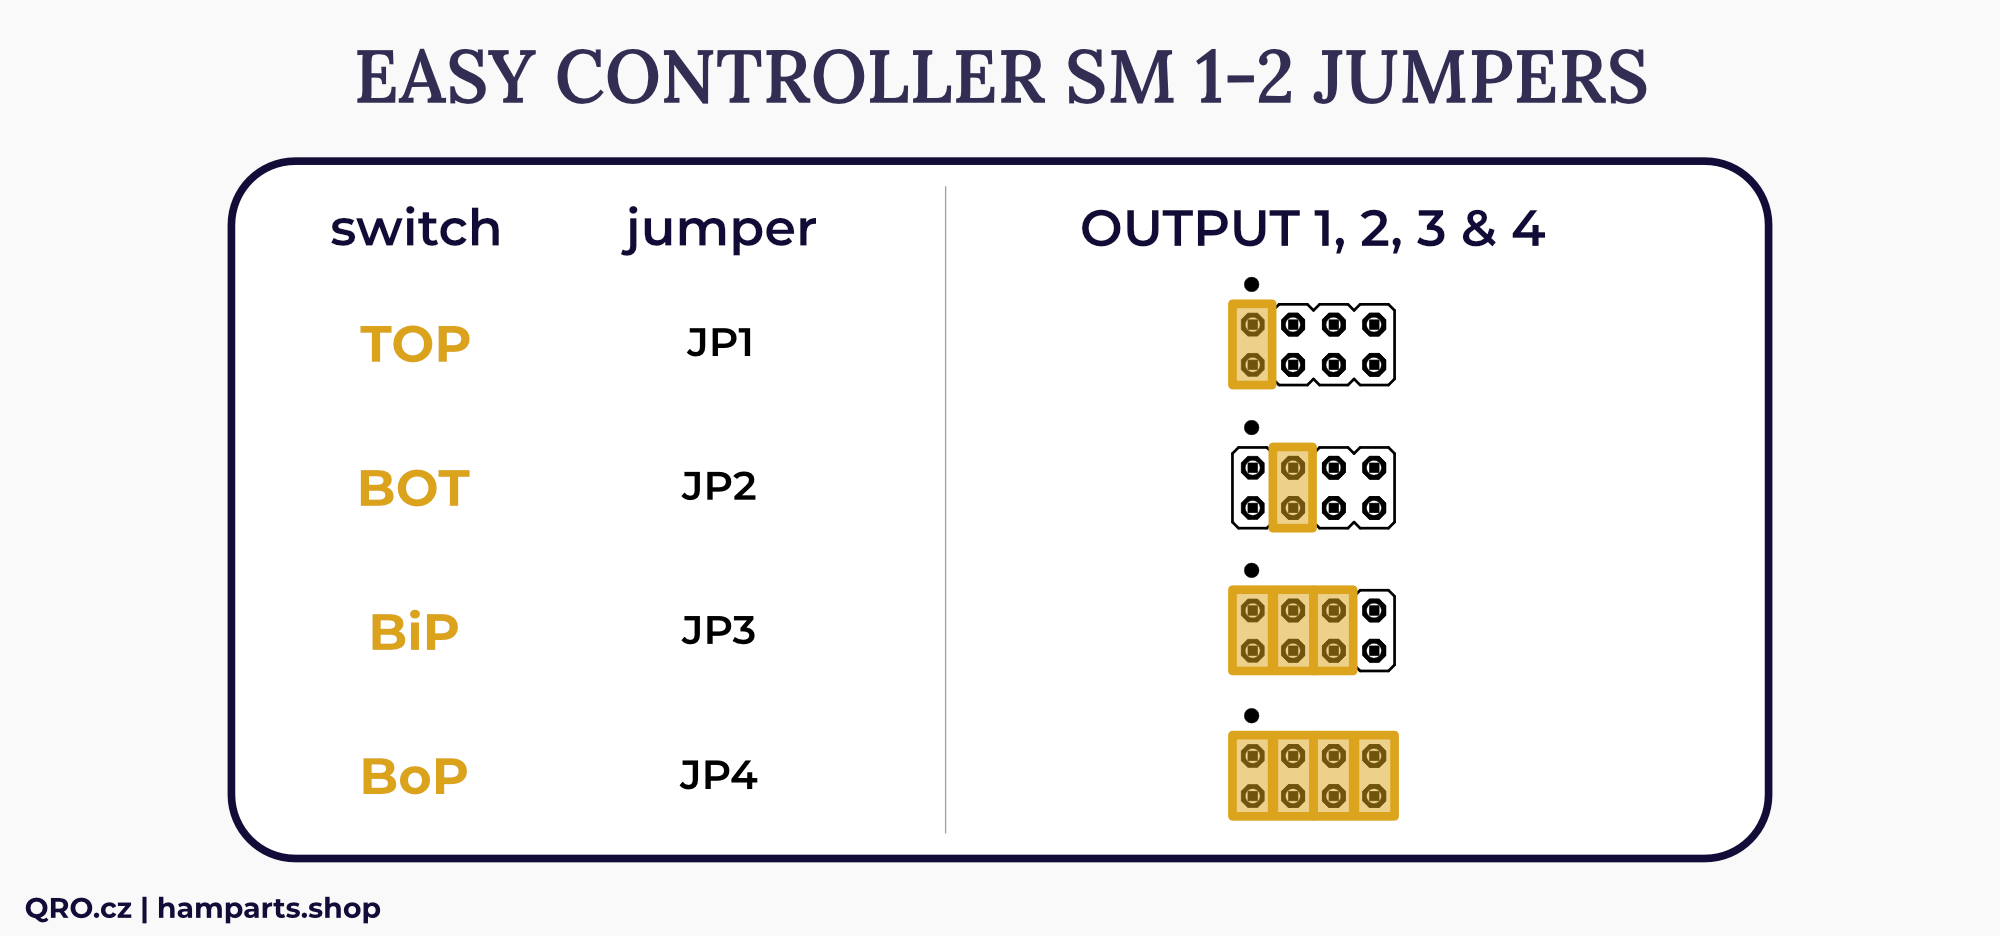 stack match 1-2 easy controller jumpers qro.cz hamparts.shop